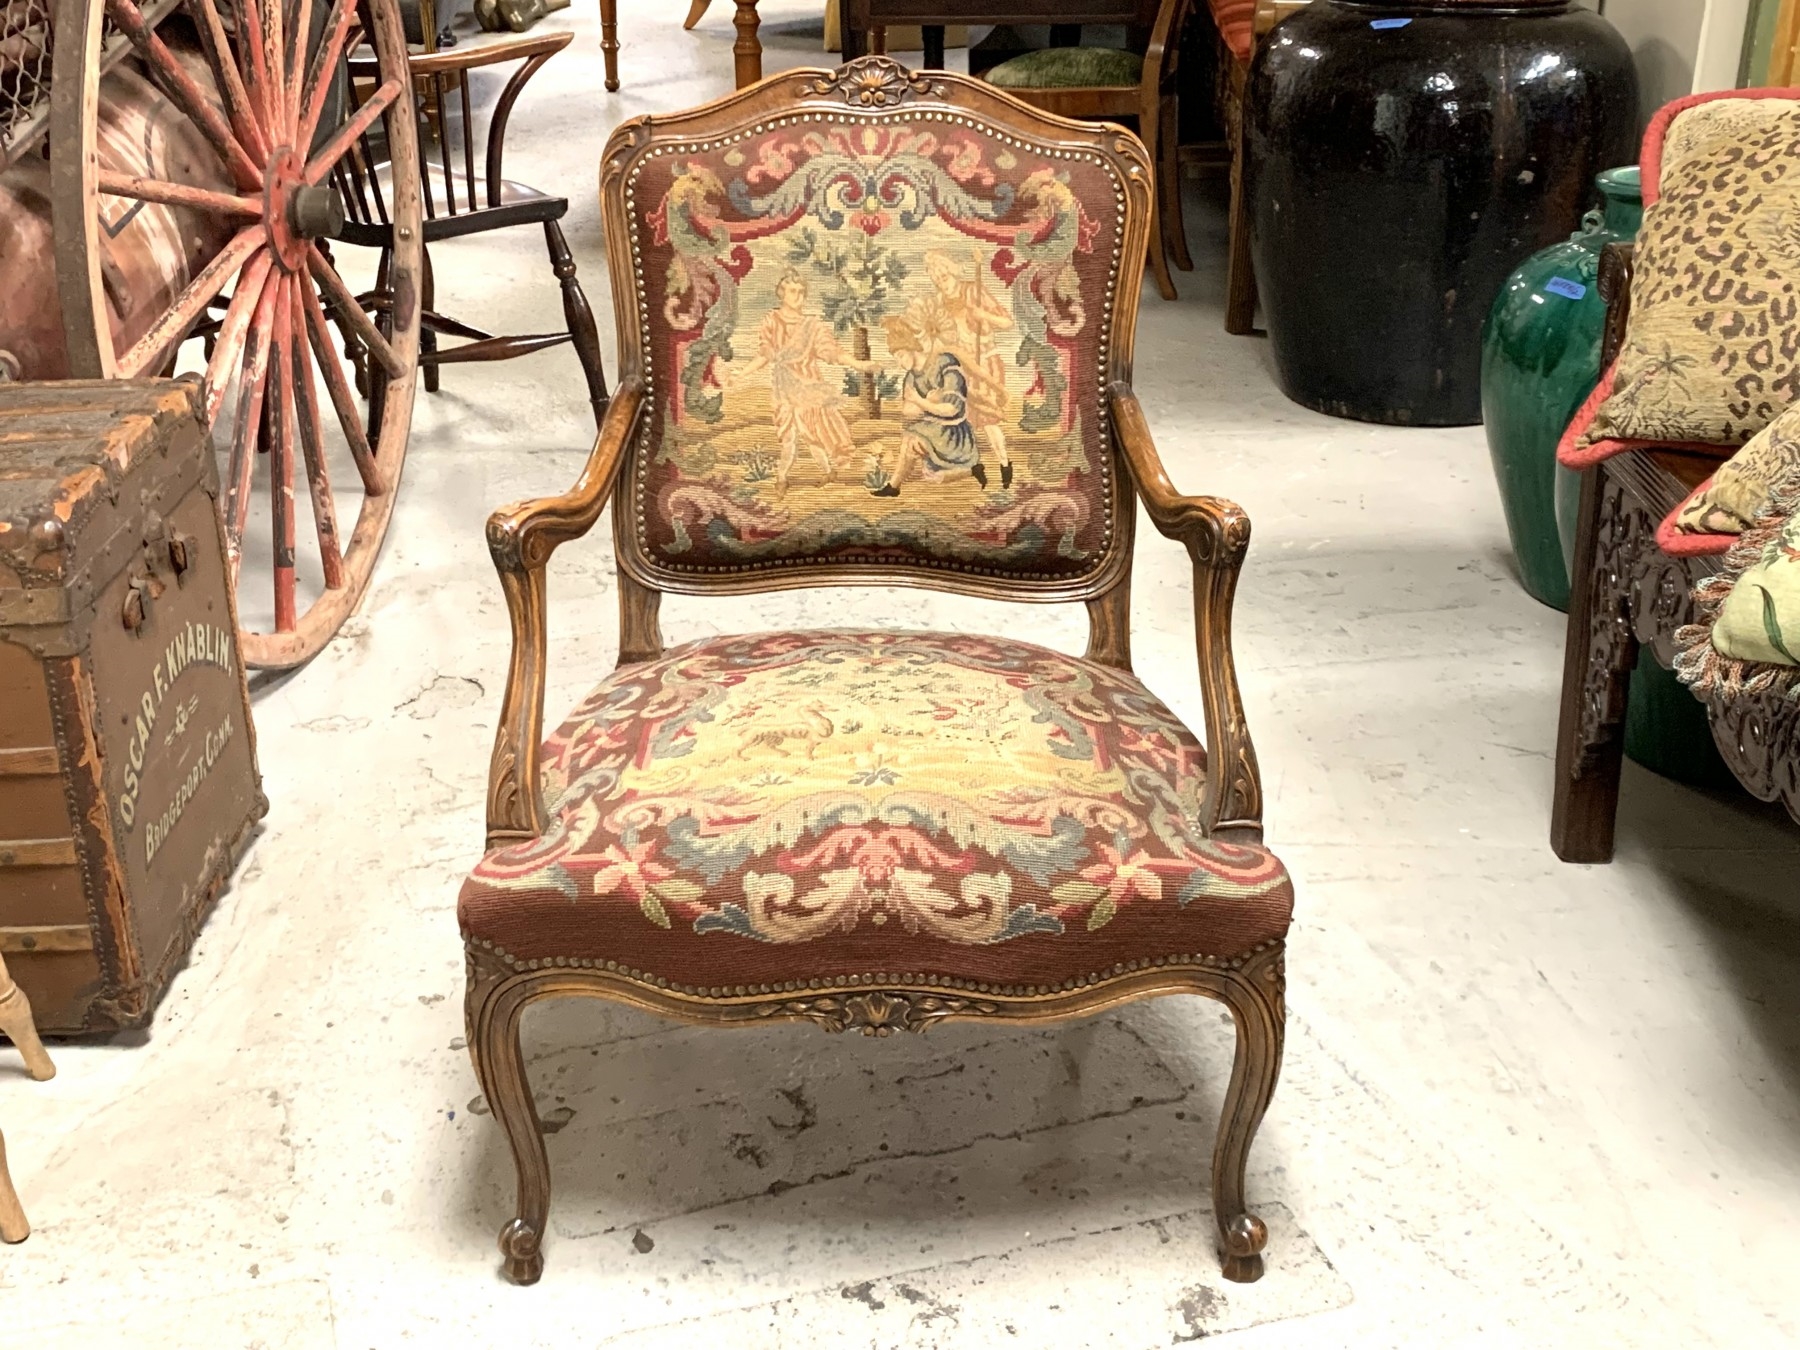 Louis XV style arm chair with needlepoint upholstery.